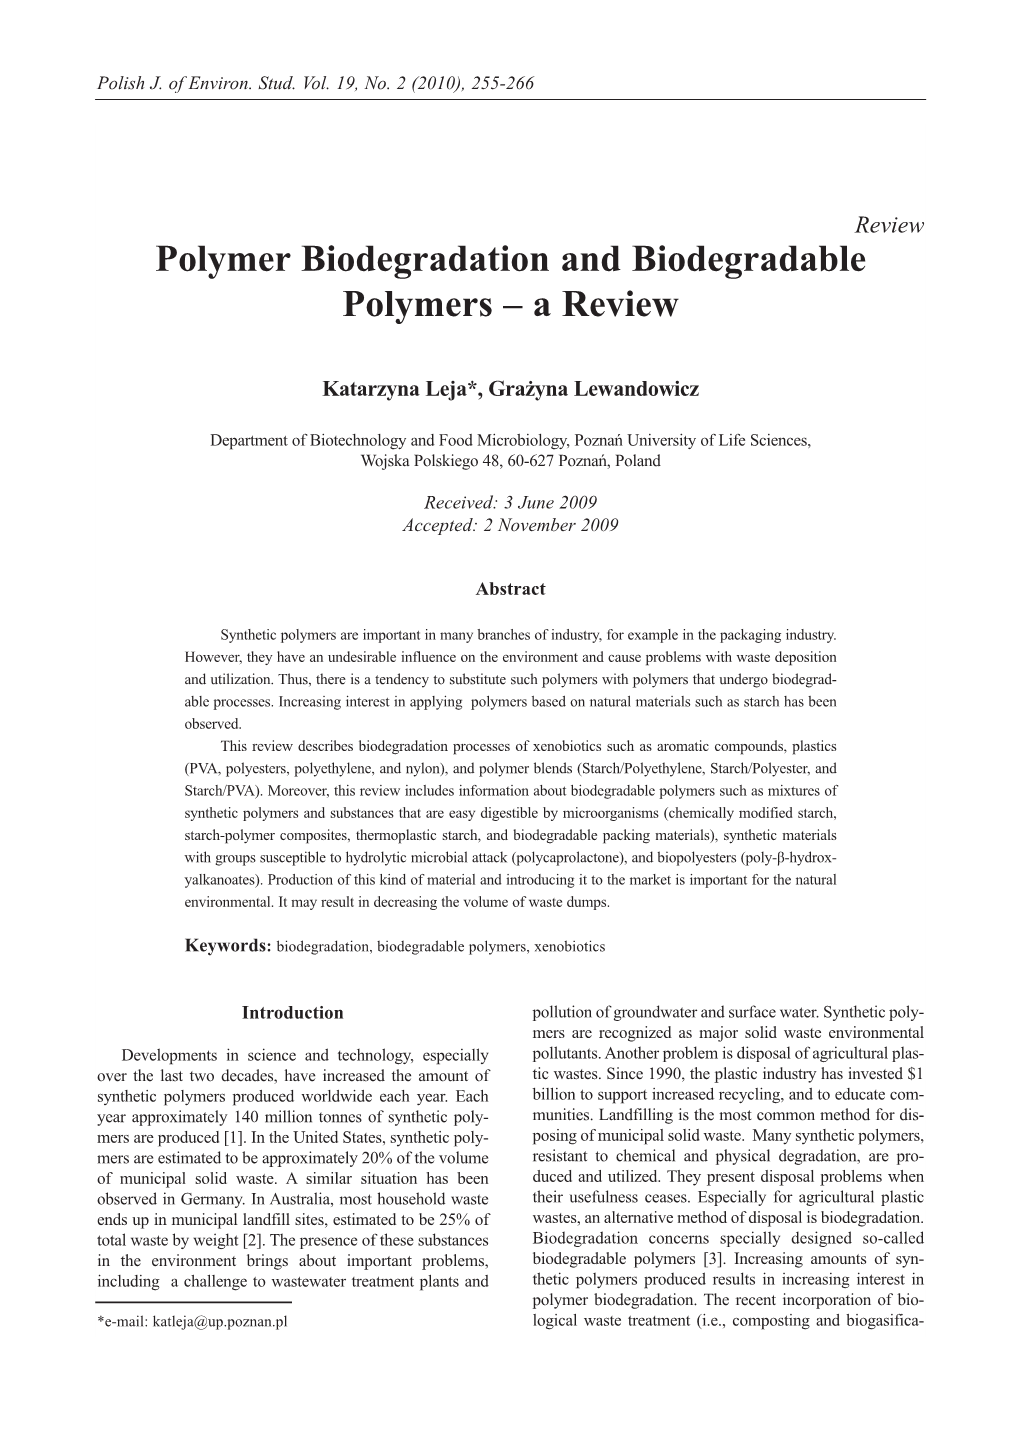 Polymer Biodegradation and Biodegradable Polymers – a Review